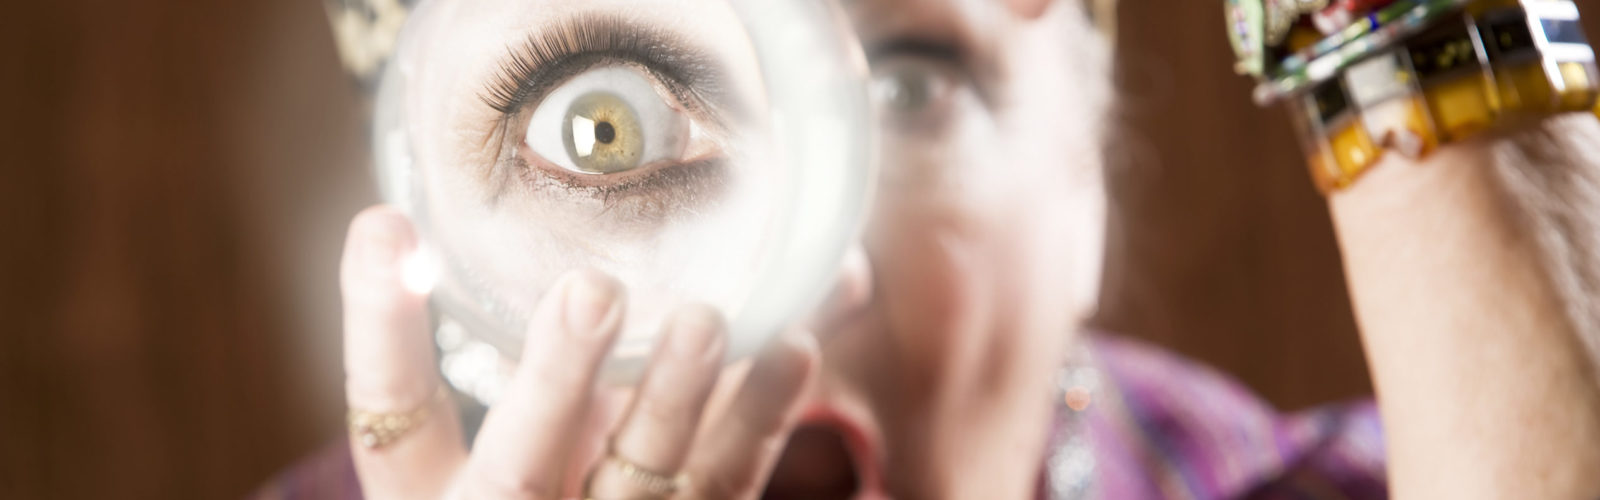 Three Tips for Marketing in 2020: No Crystal Ball Needed | ODEA